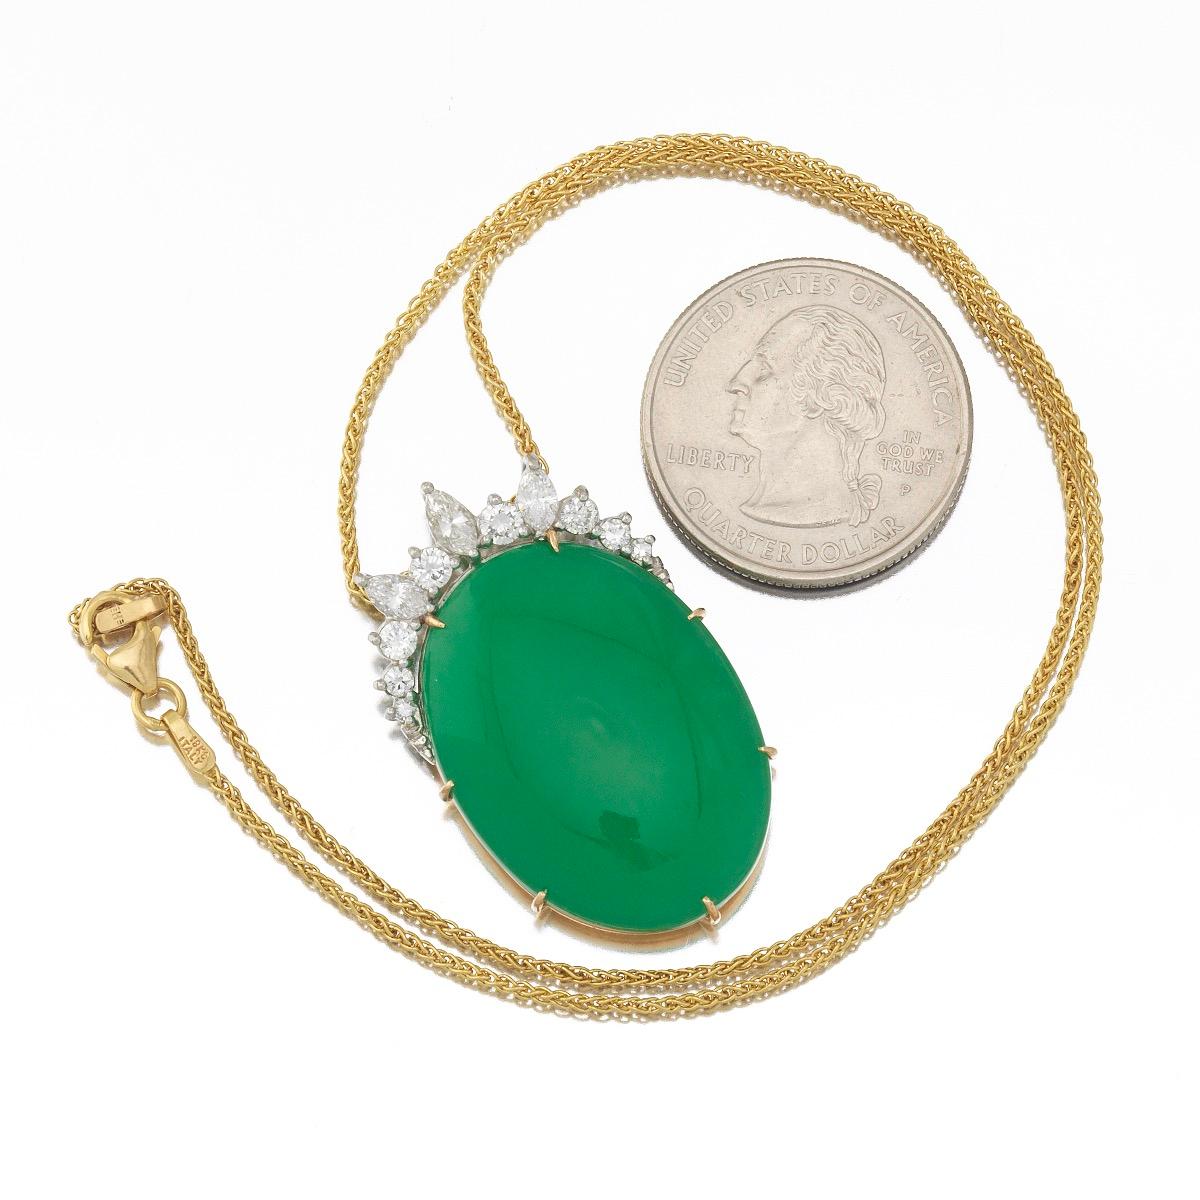 Striking platinum and 18k yellow gold pendant necklace is set with a large green chrysoprase cabochon measuring 27mm x 22mm x 6.92mm.  

The stone is surmounted by G-H VS quality round brilliant cut and marquis cut diamonds, with a total estimated